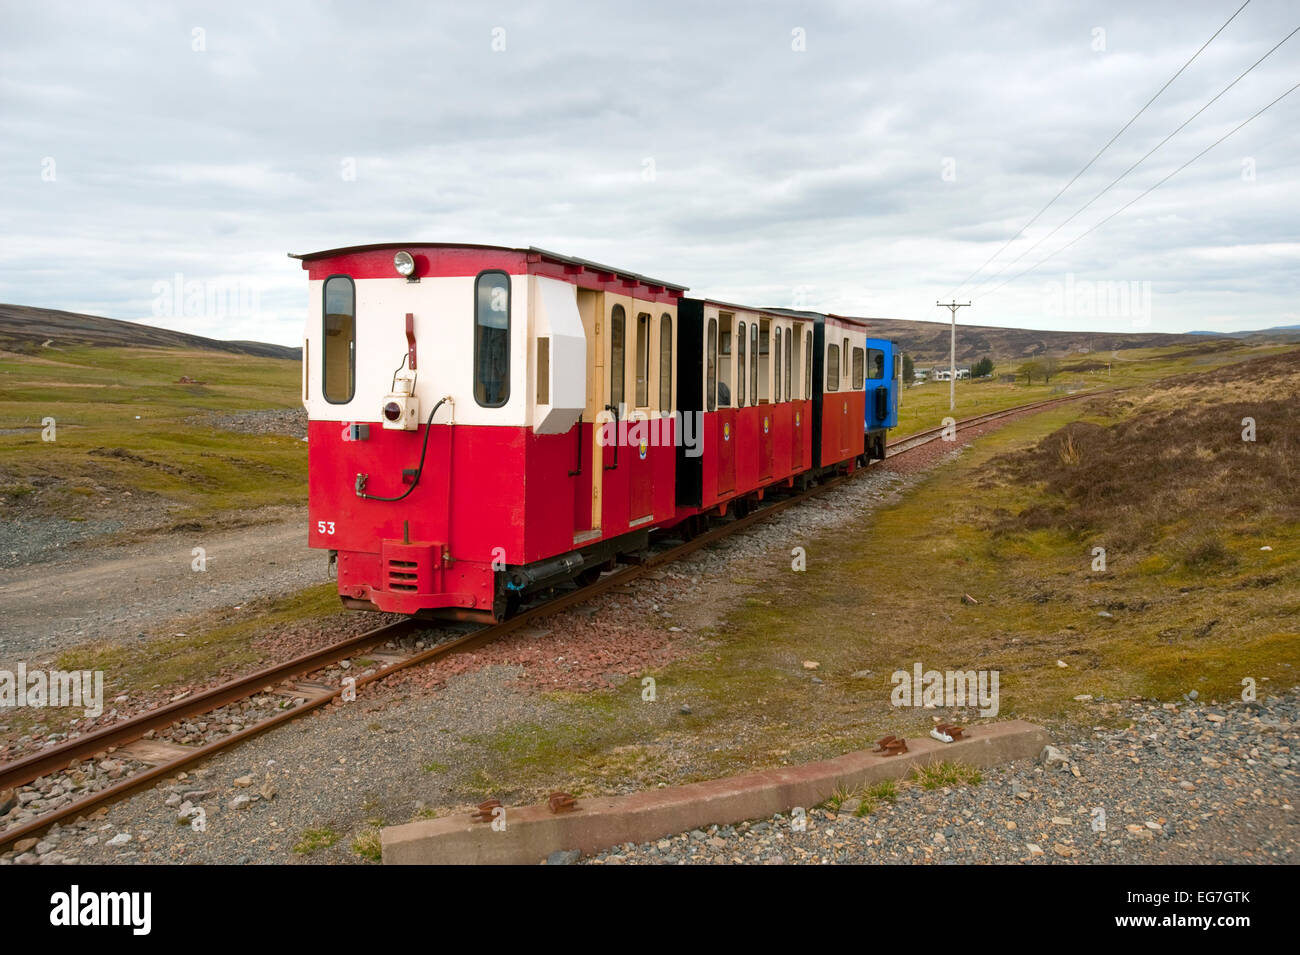 Train on the Wanlockhead and leadhills railway. Leadhills is a village in South Lanarkshire, Scotland, 5¾ miles WSW of Elvanfoot Stock Photo